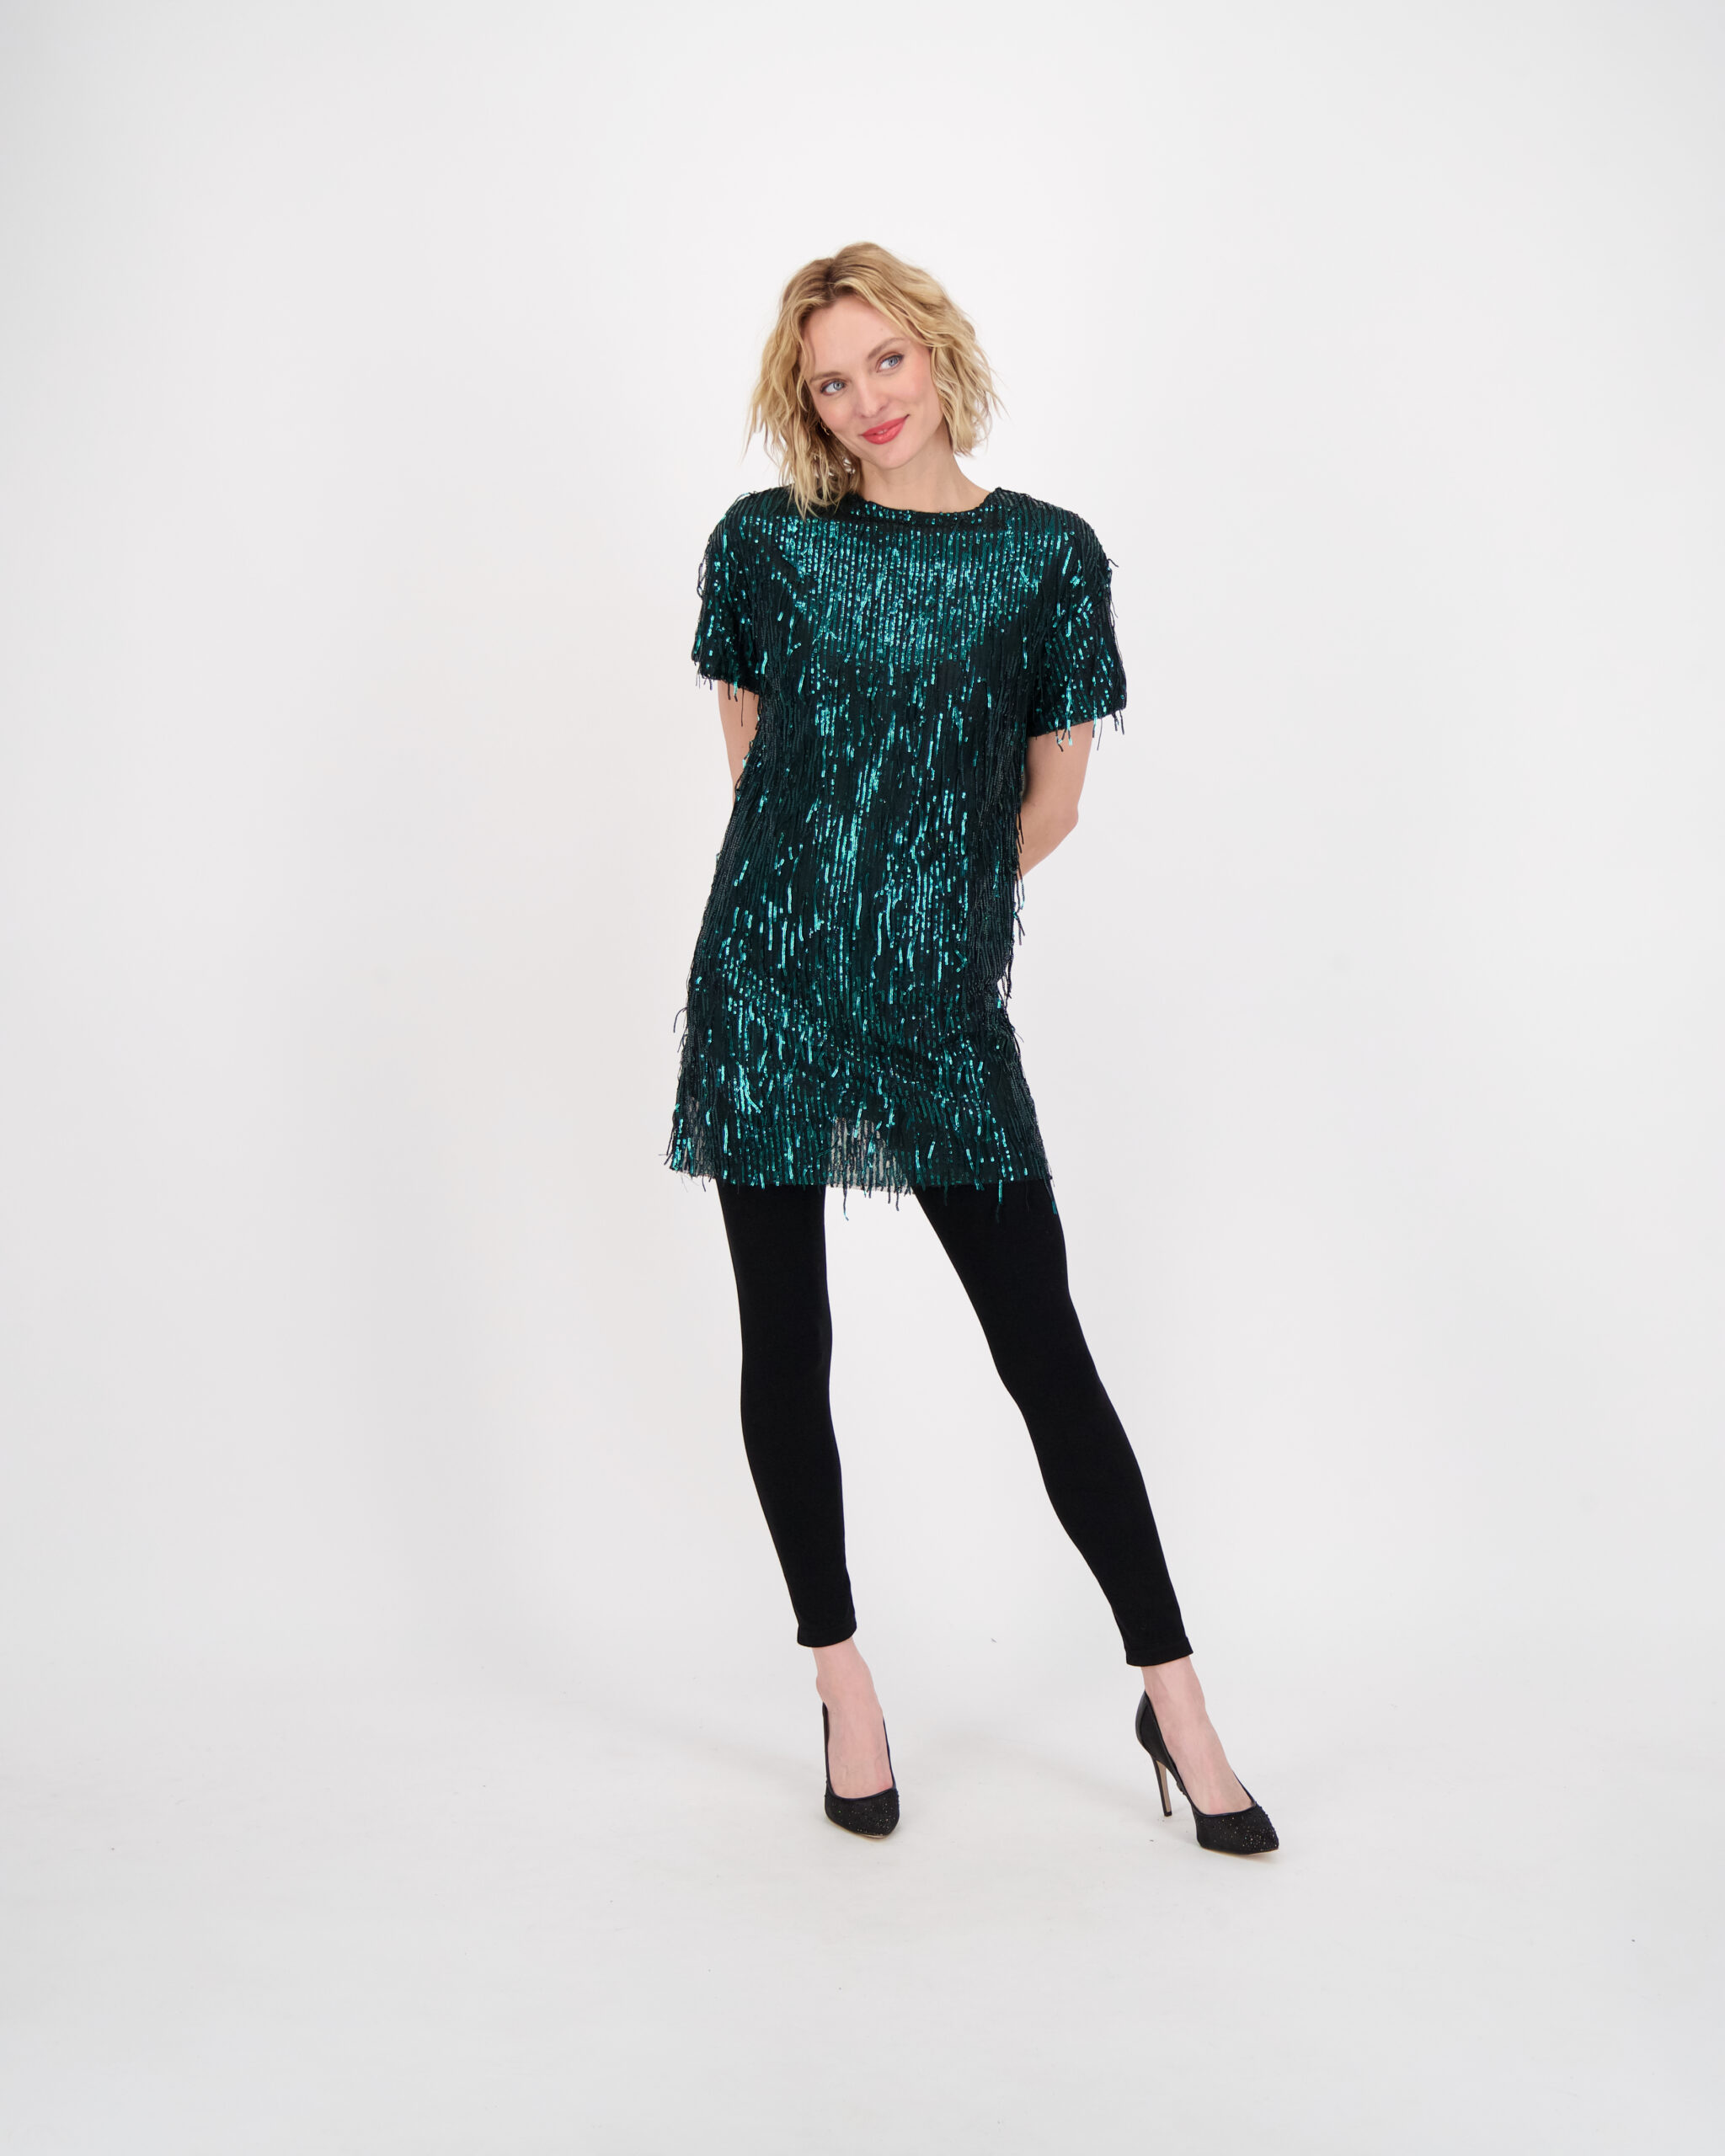 Sequin Fringed Mini Dress by Gabby Isabella in Green